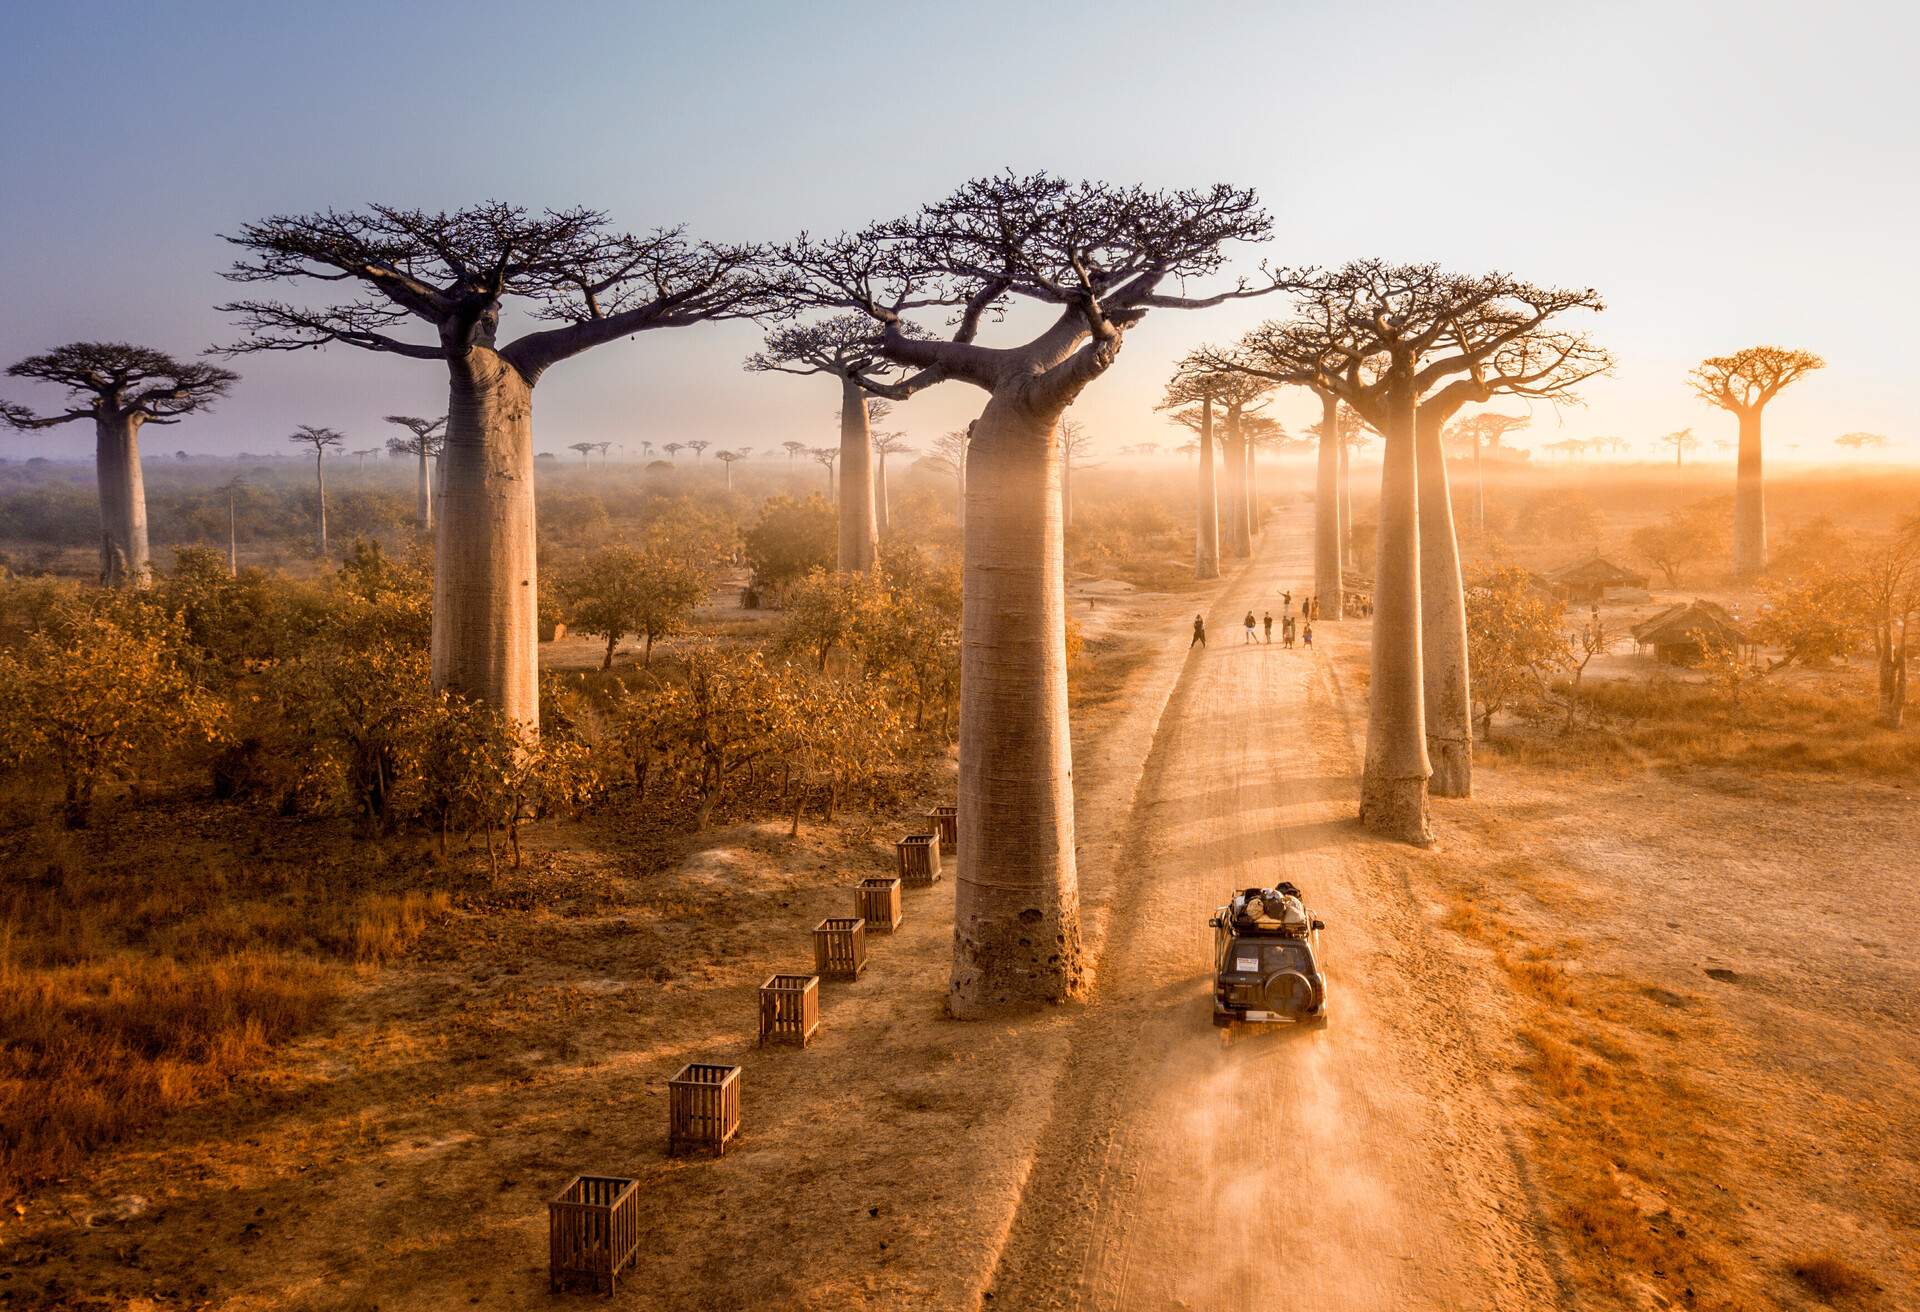 An off-road SUV approaching a group of people standing in the middle of a dusty road surrounded by baobab trees.